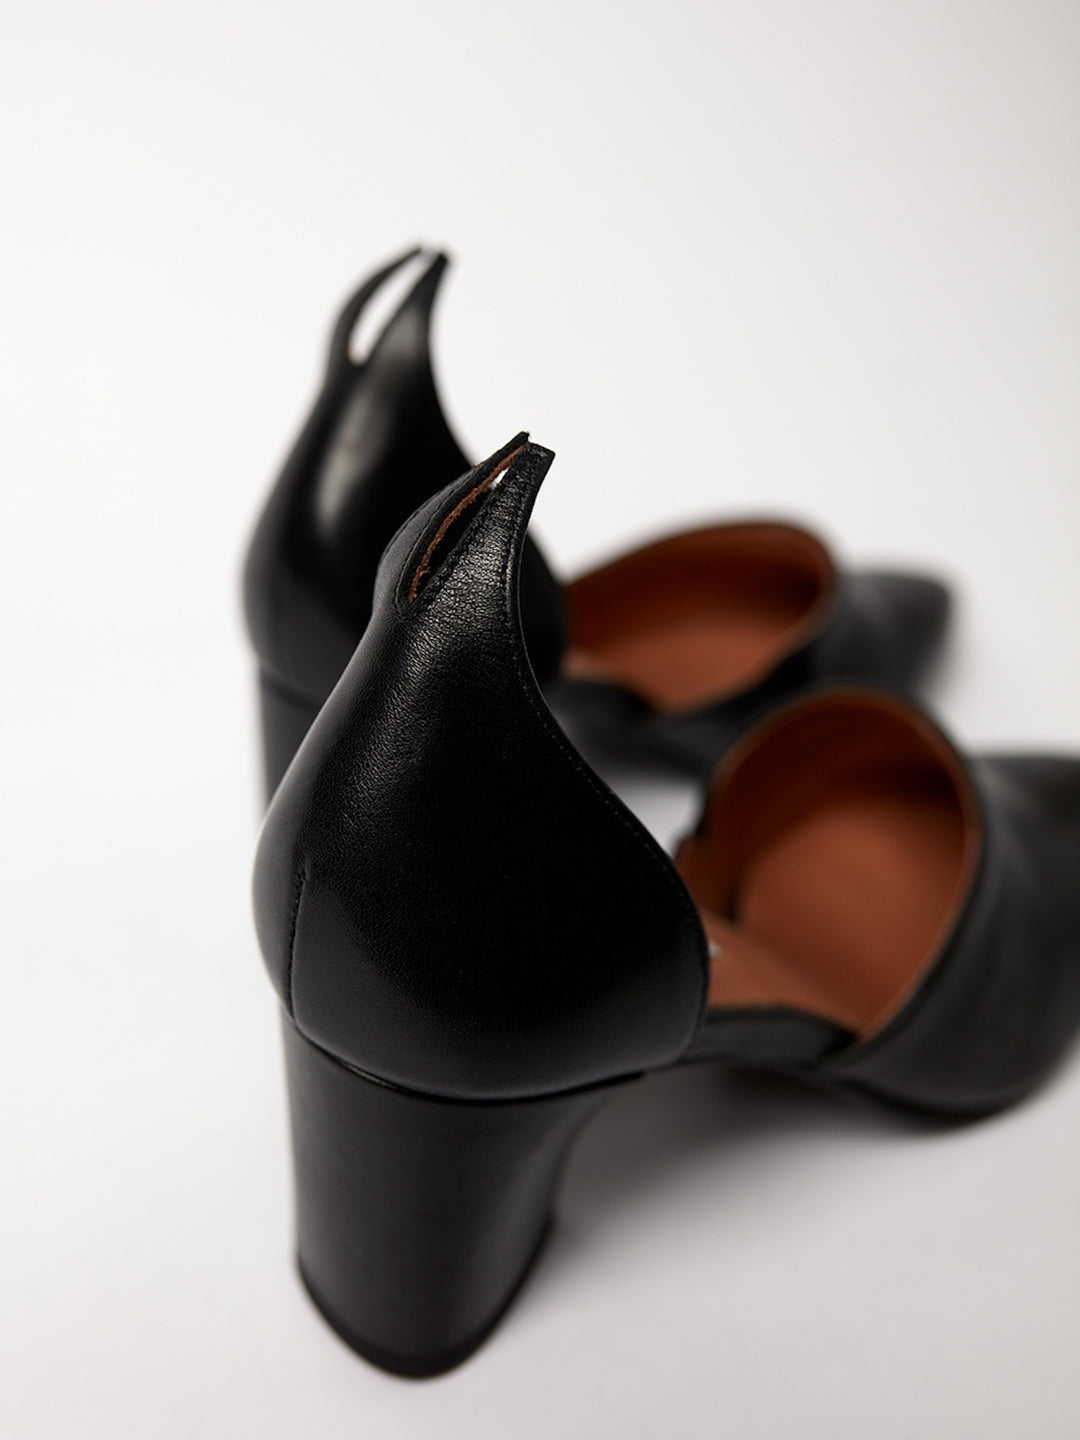 Blankens comfy heel The Riverside in black leather. Made in Portugal. Yourblankens.